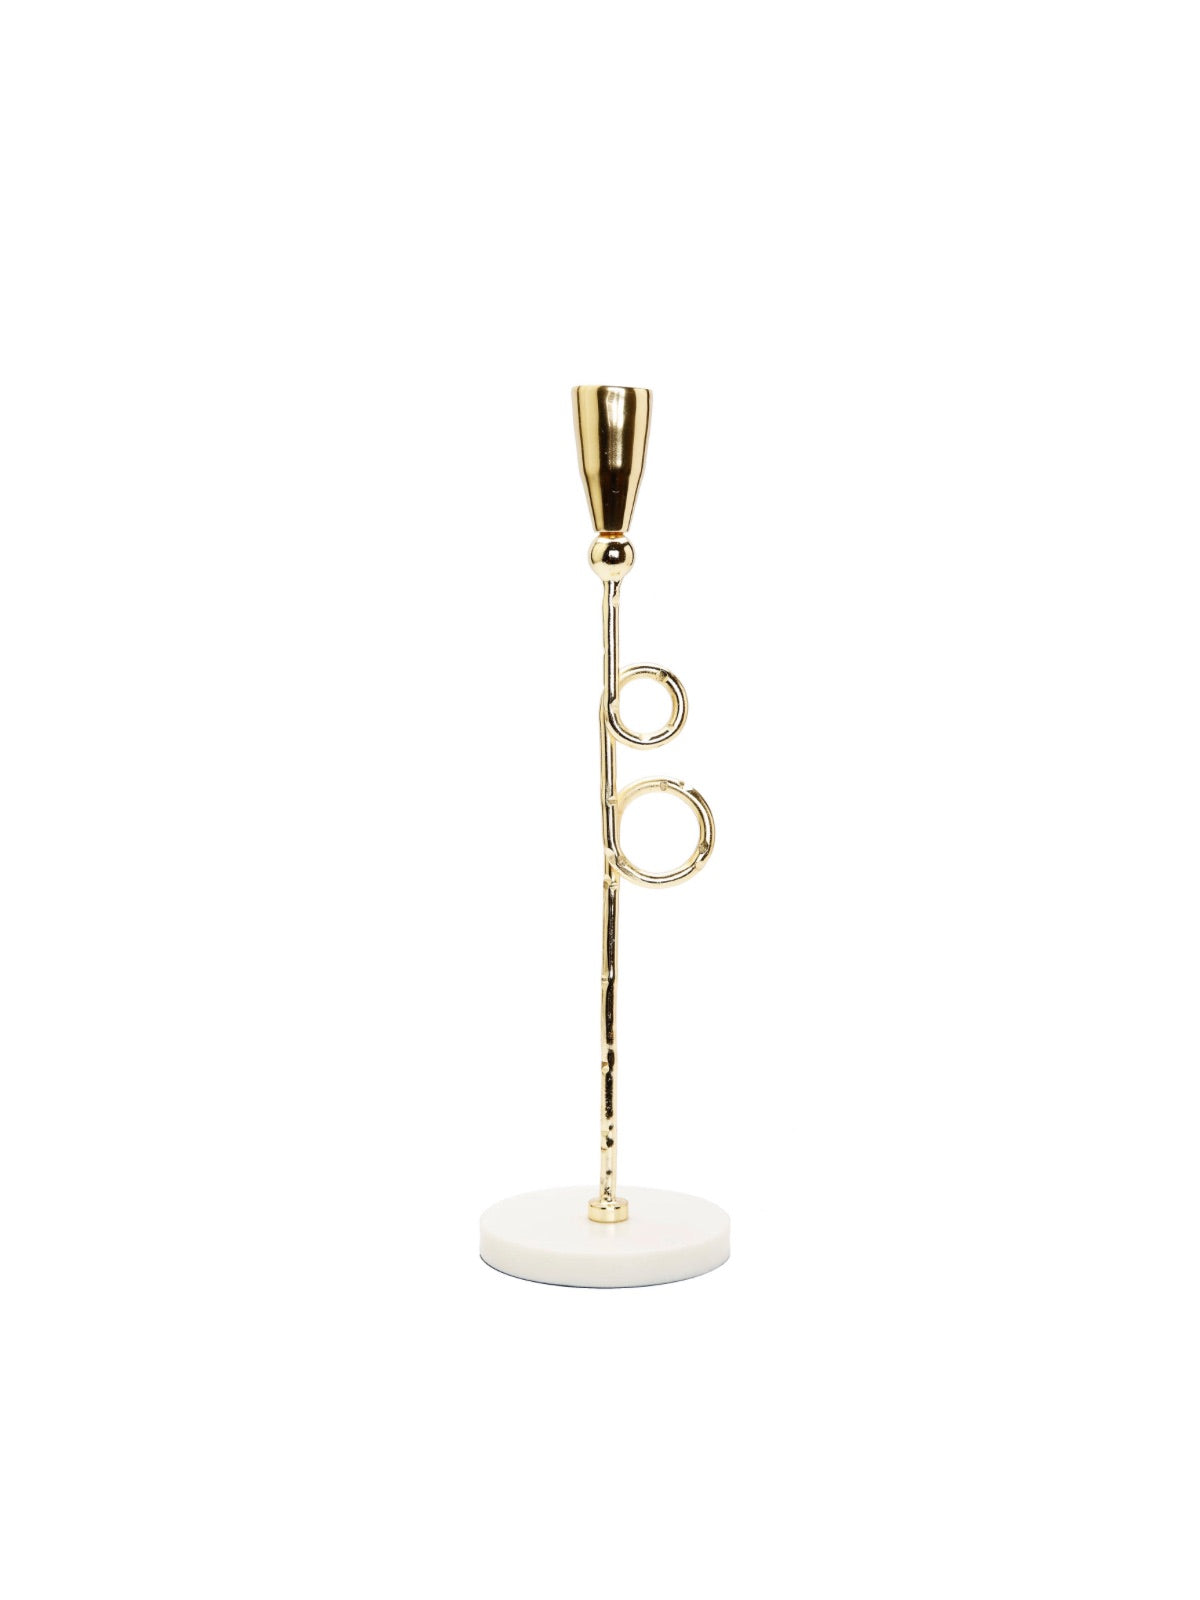 11.3H Metal Gold Loop Taper Candle Holder On Marble Base. Sold by KYA Home Decor. 